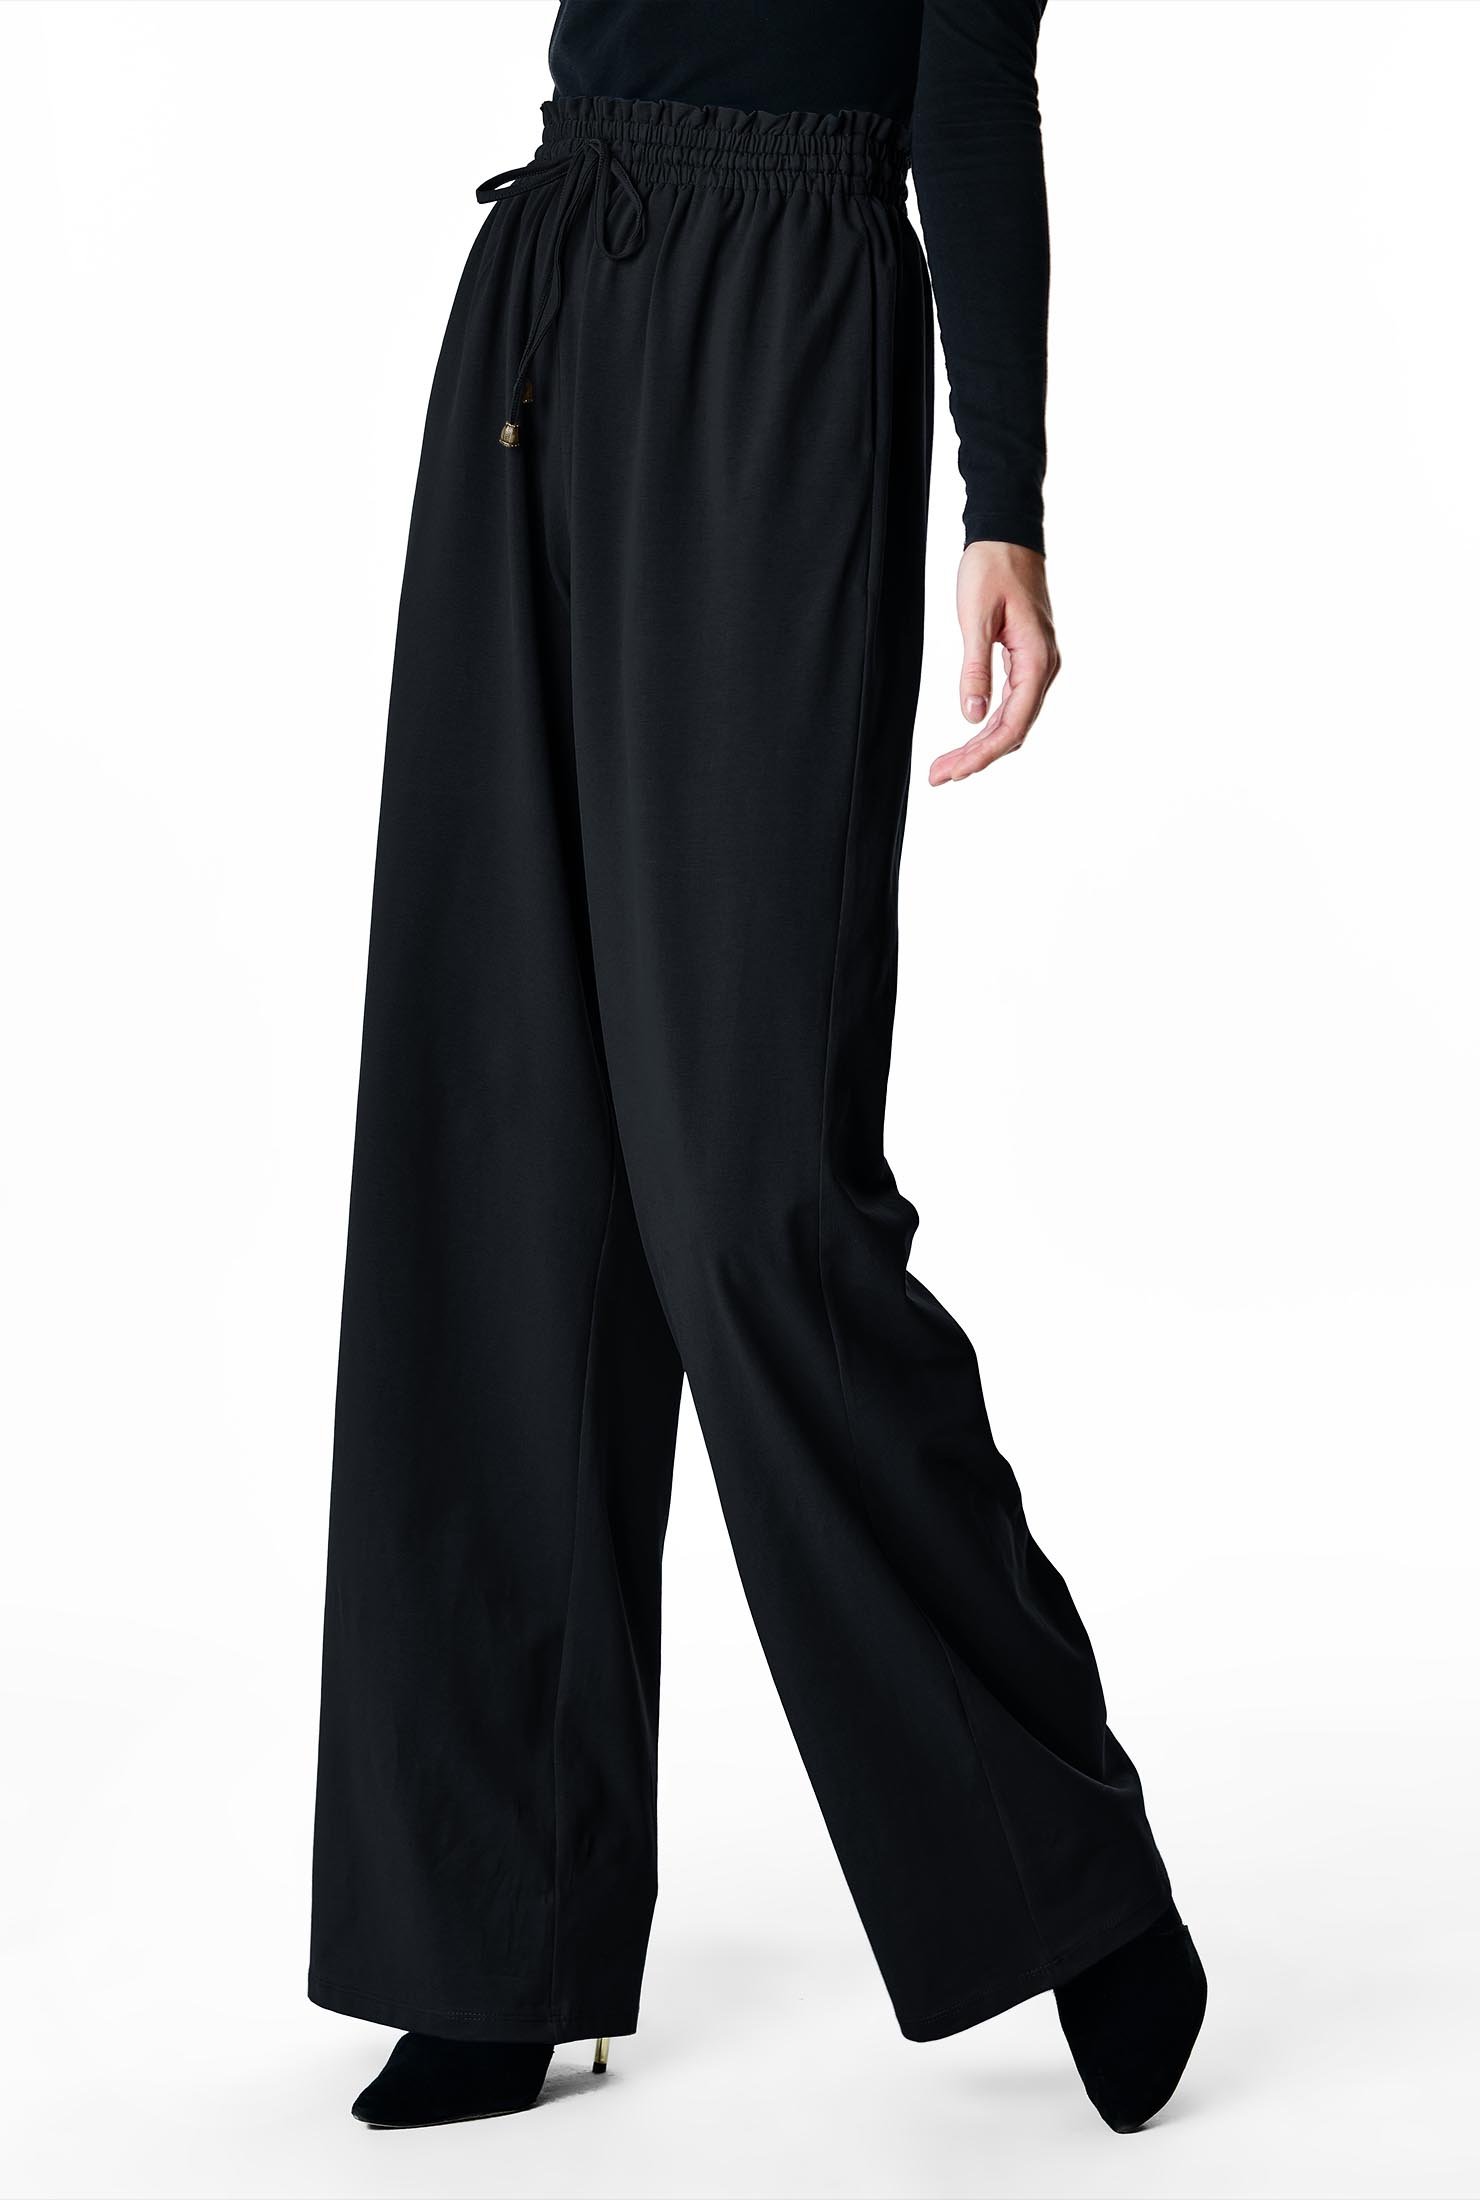 H&M Jersey Pants black casual look Fashion Trousers Jersey Pants 